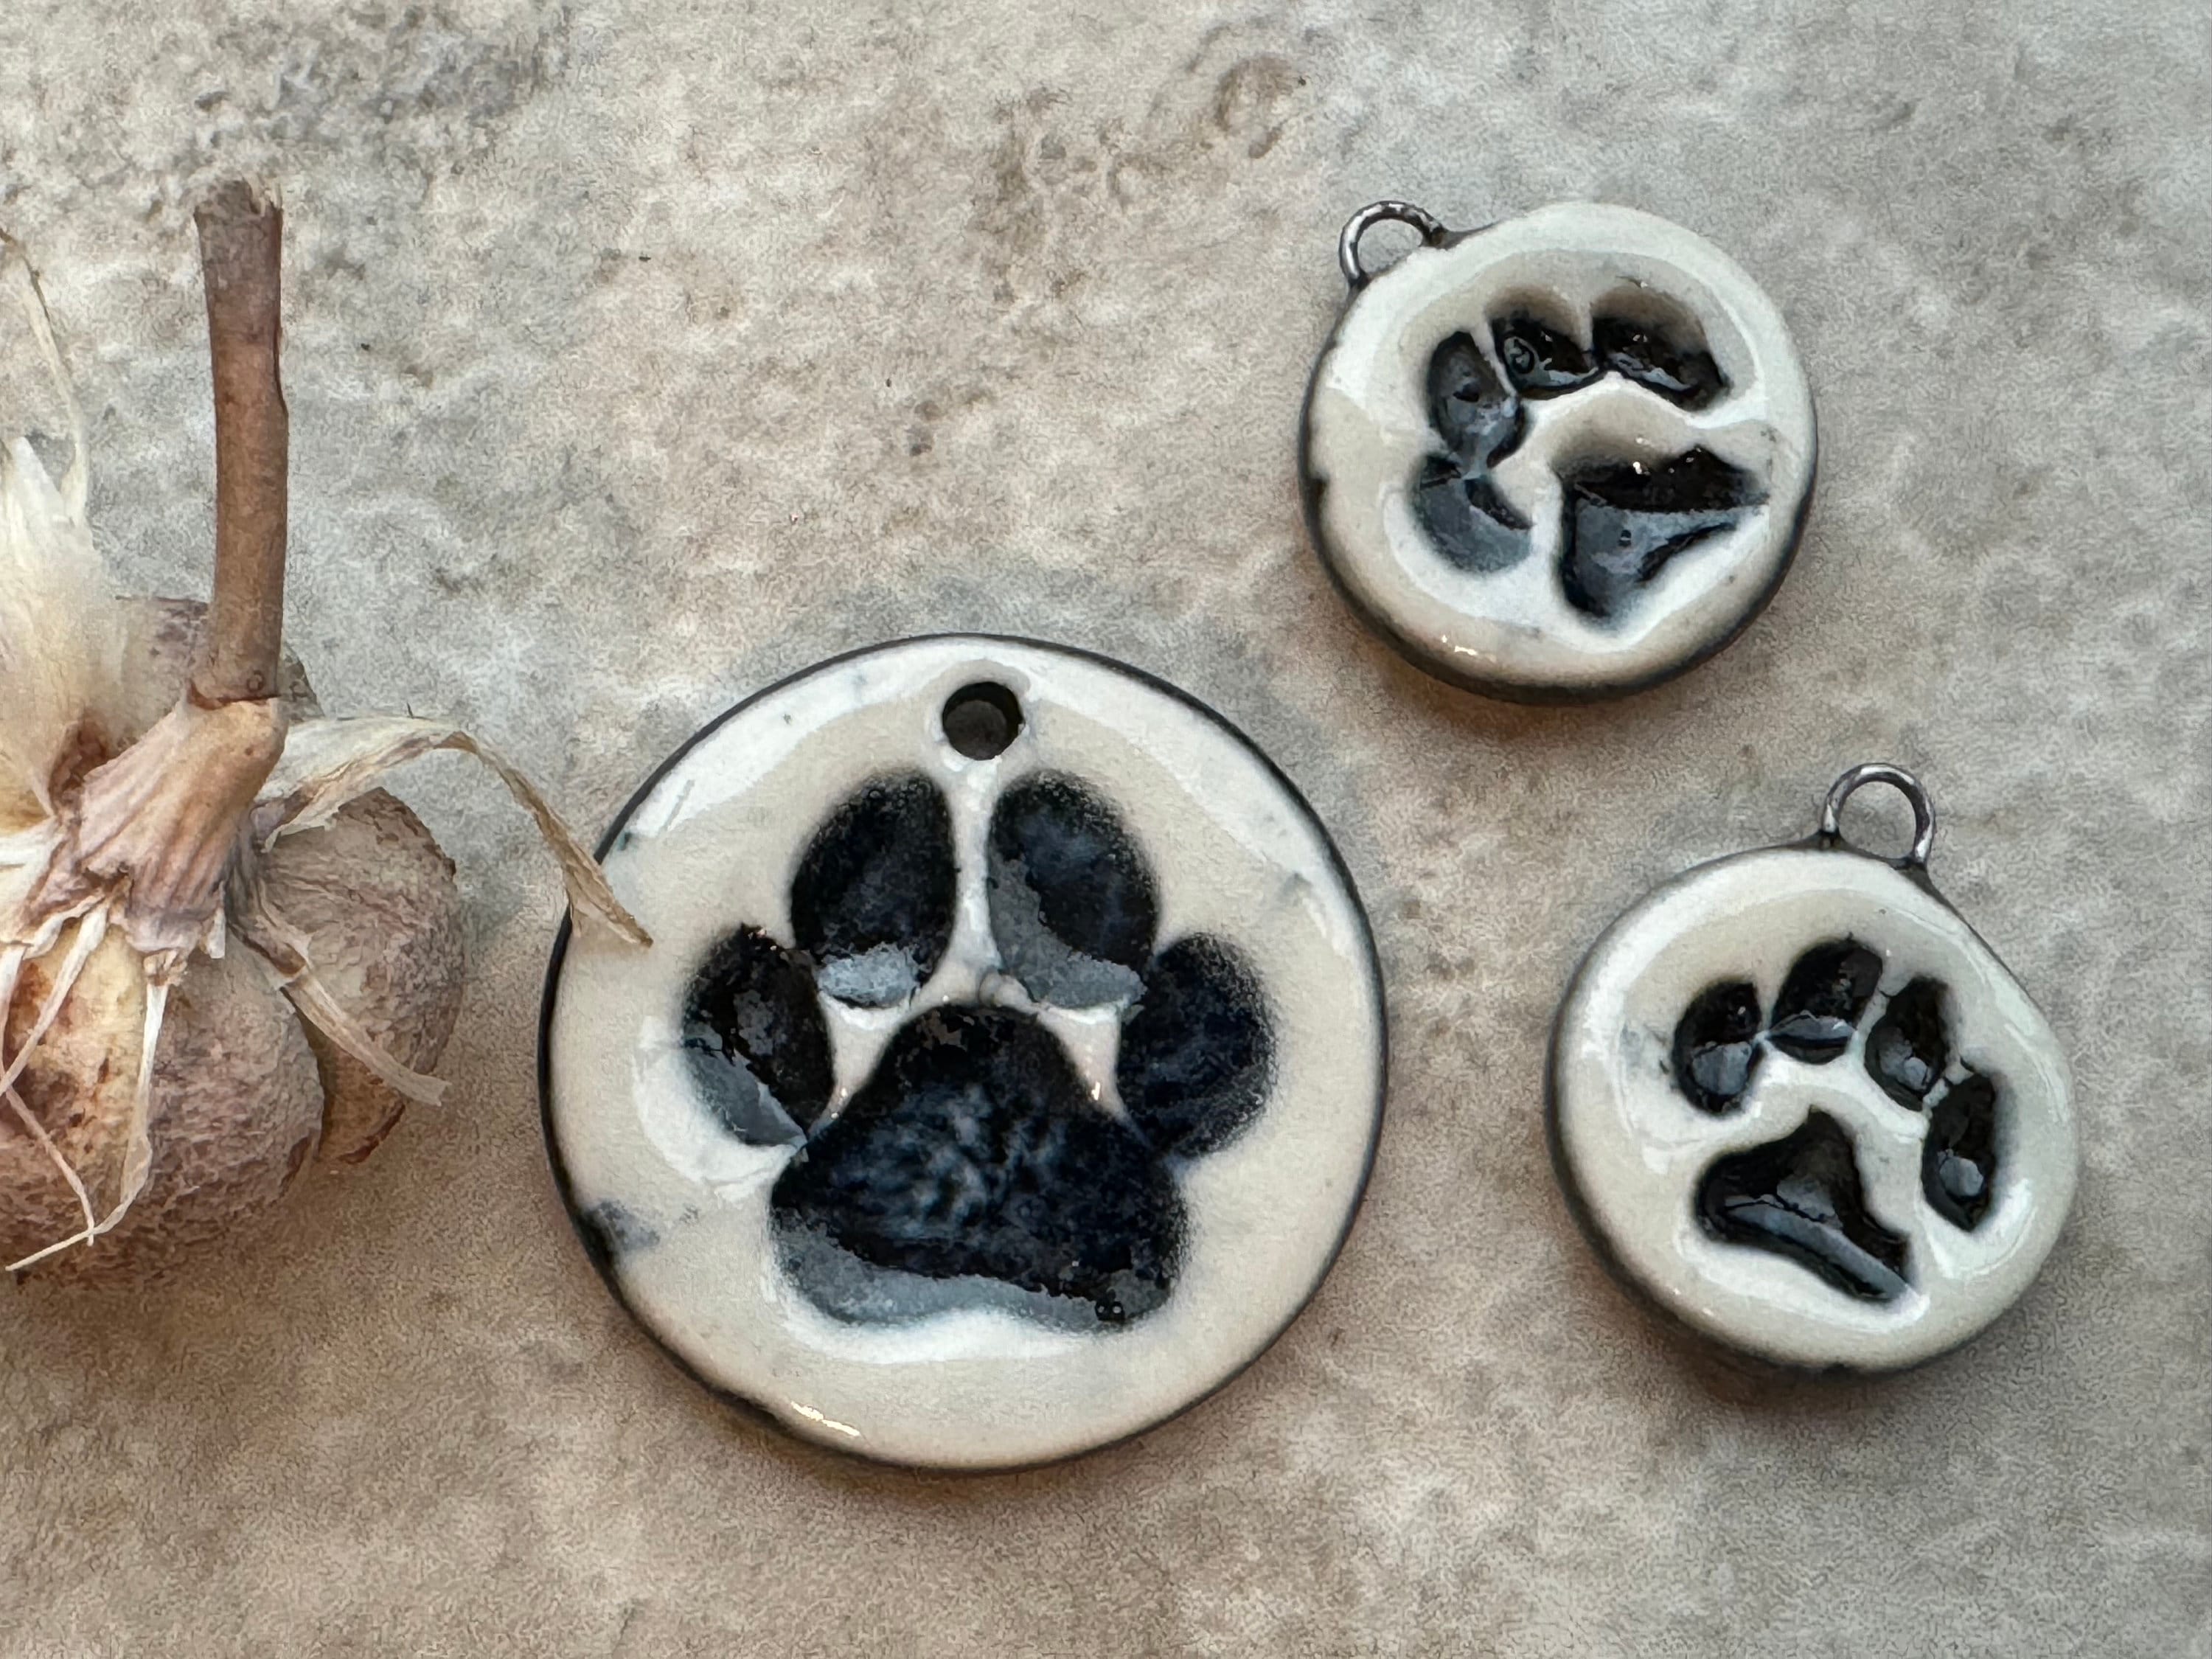 Black and White Paw Print Pendant and Charms, Dog Round Pendant, Porcelain Ceramic Pendant, Dog Paw Charms, Jewelry Making Components